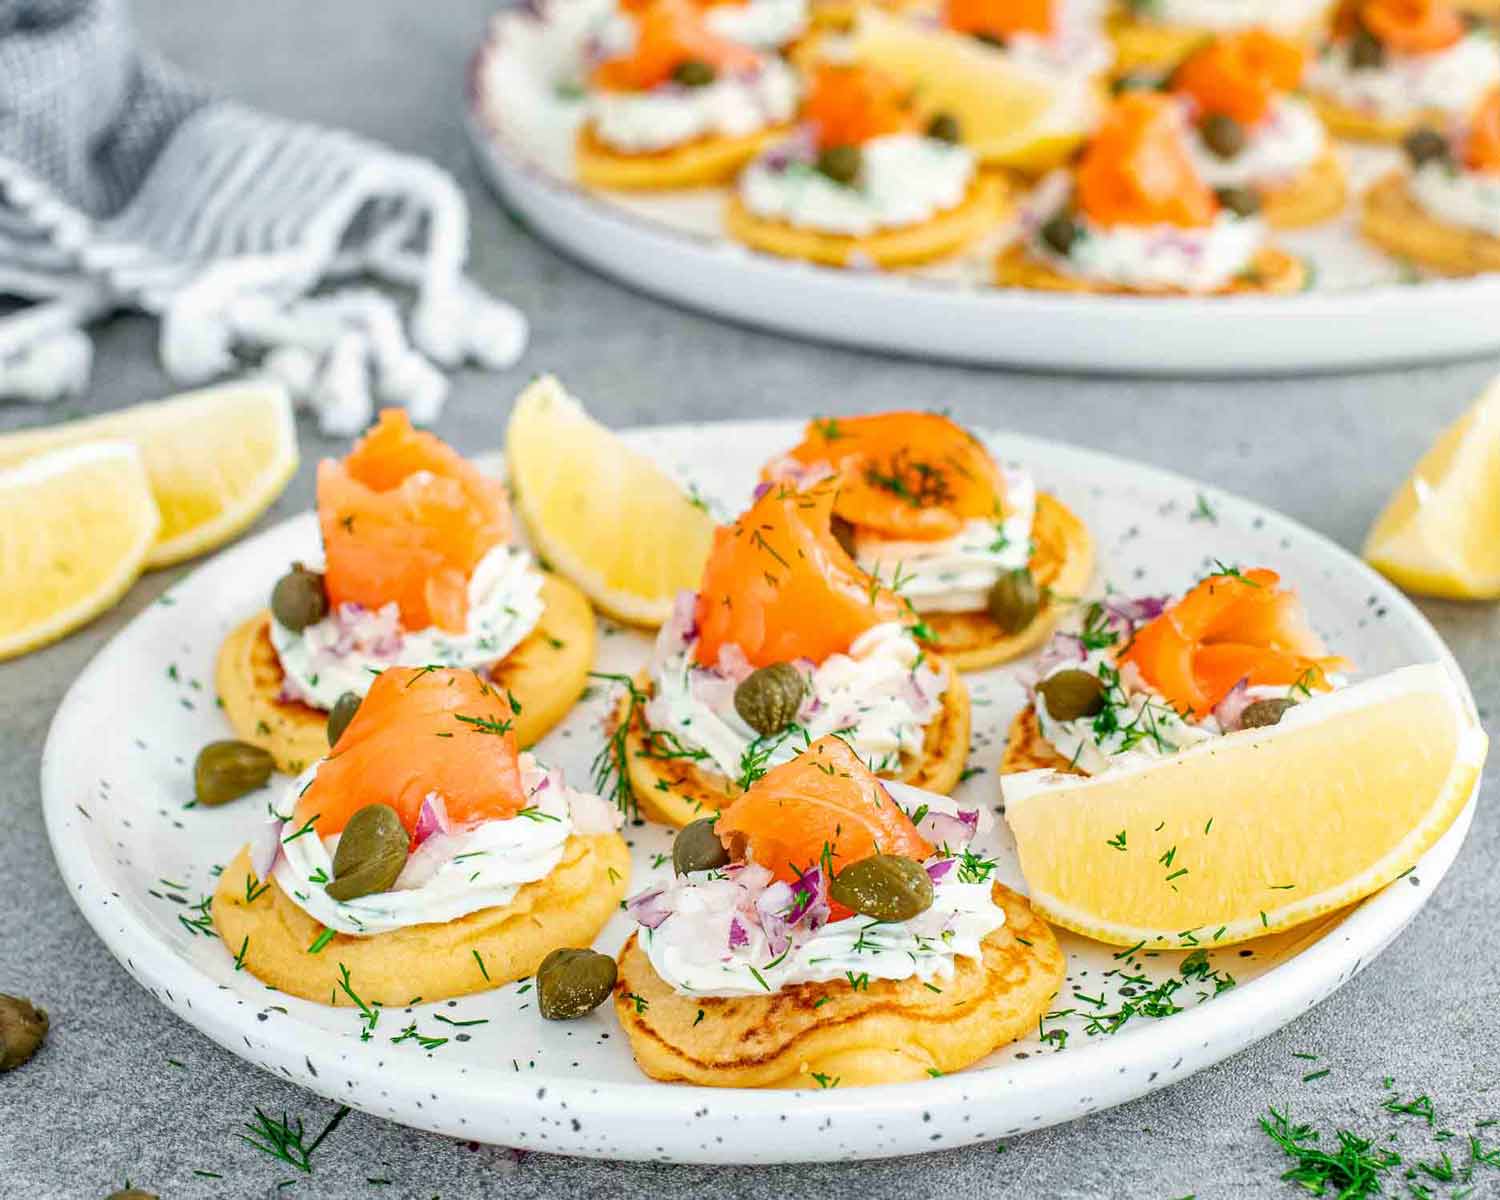 freshly made smoked salmon blinis on a white plate garnished with lemon wedges.